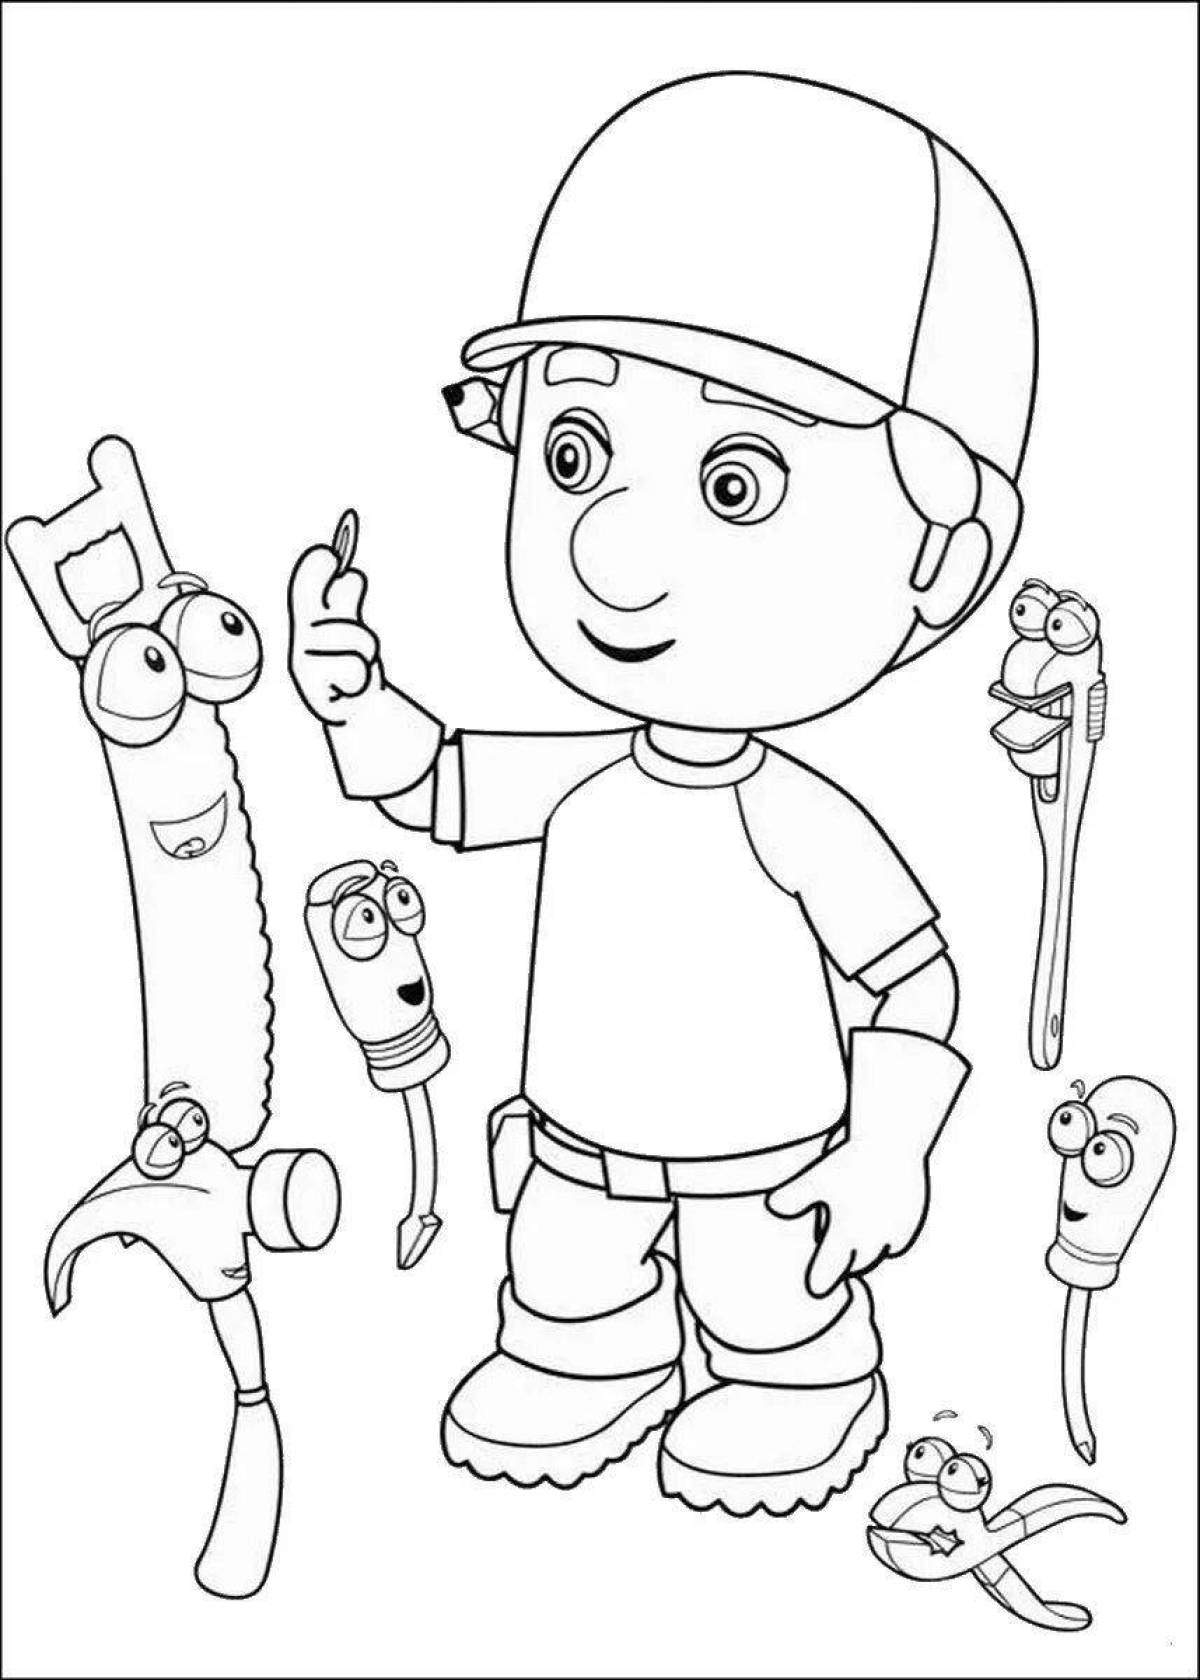 Coloring page charming gear